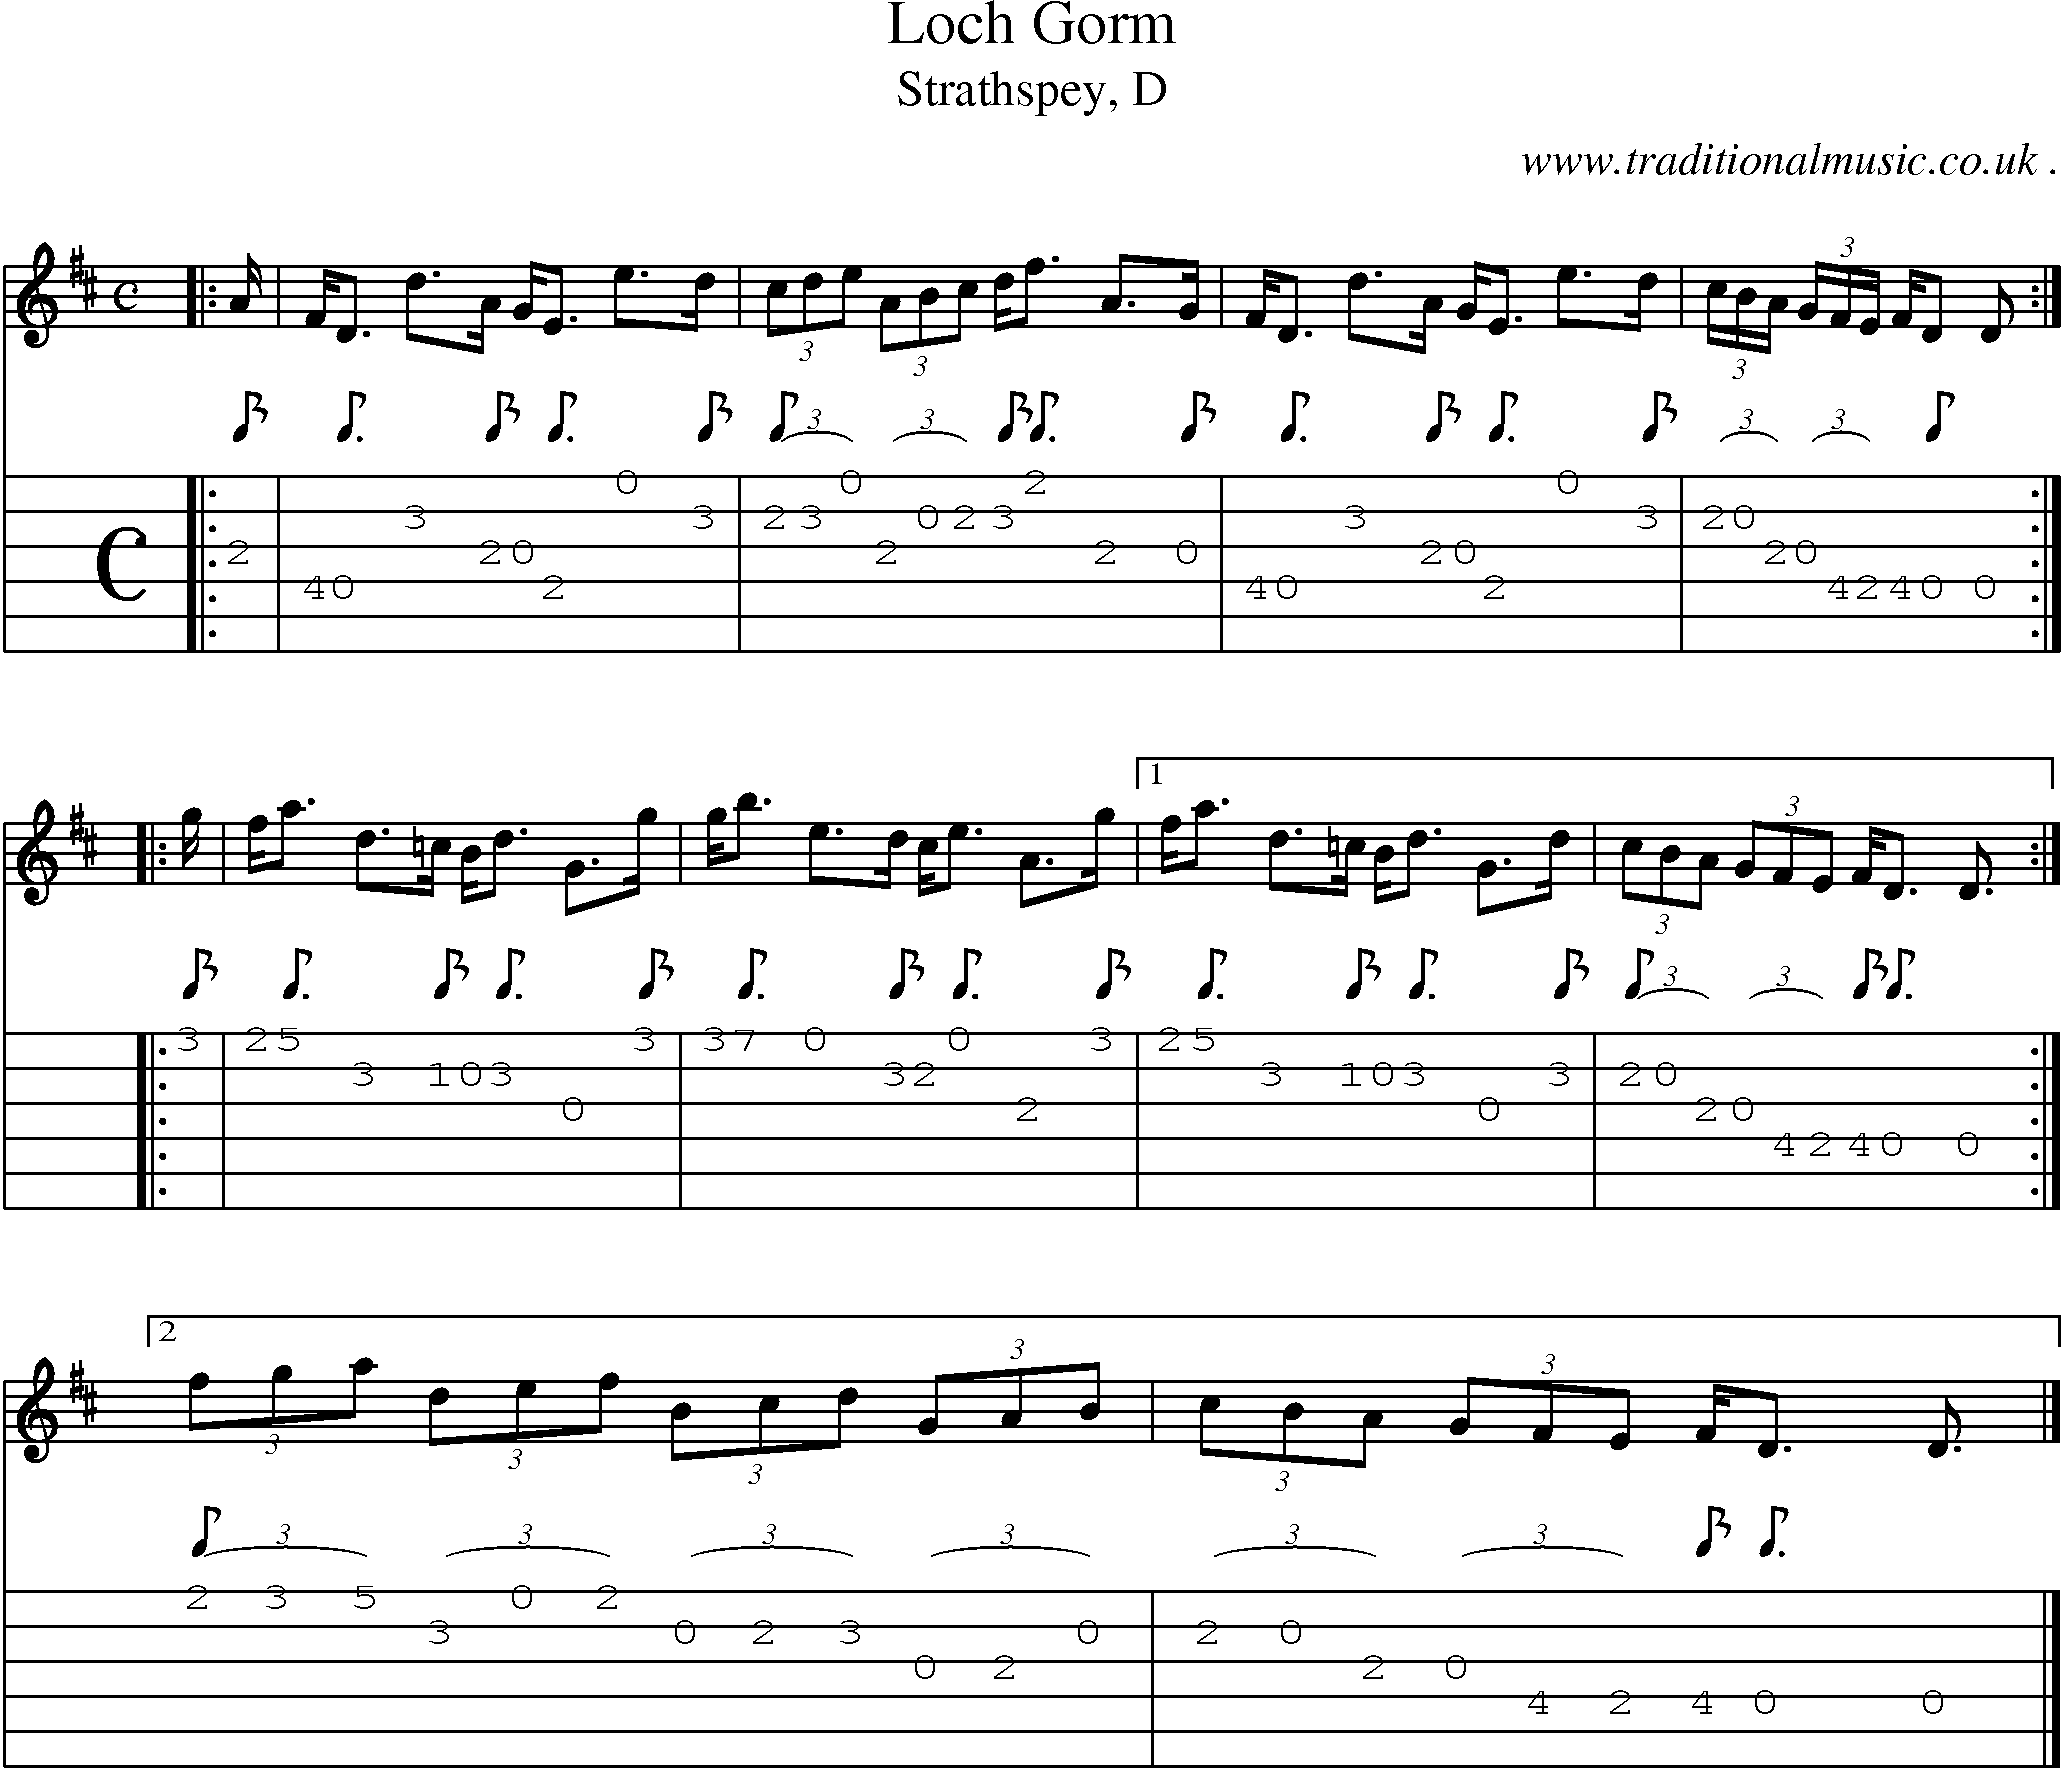 Sheet-music  score, Chords and Guitar Tabs for Loch Gorm